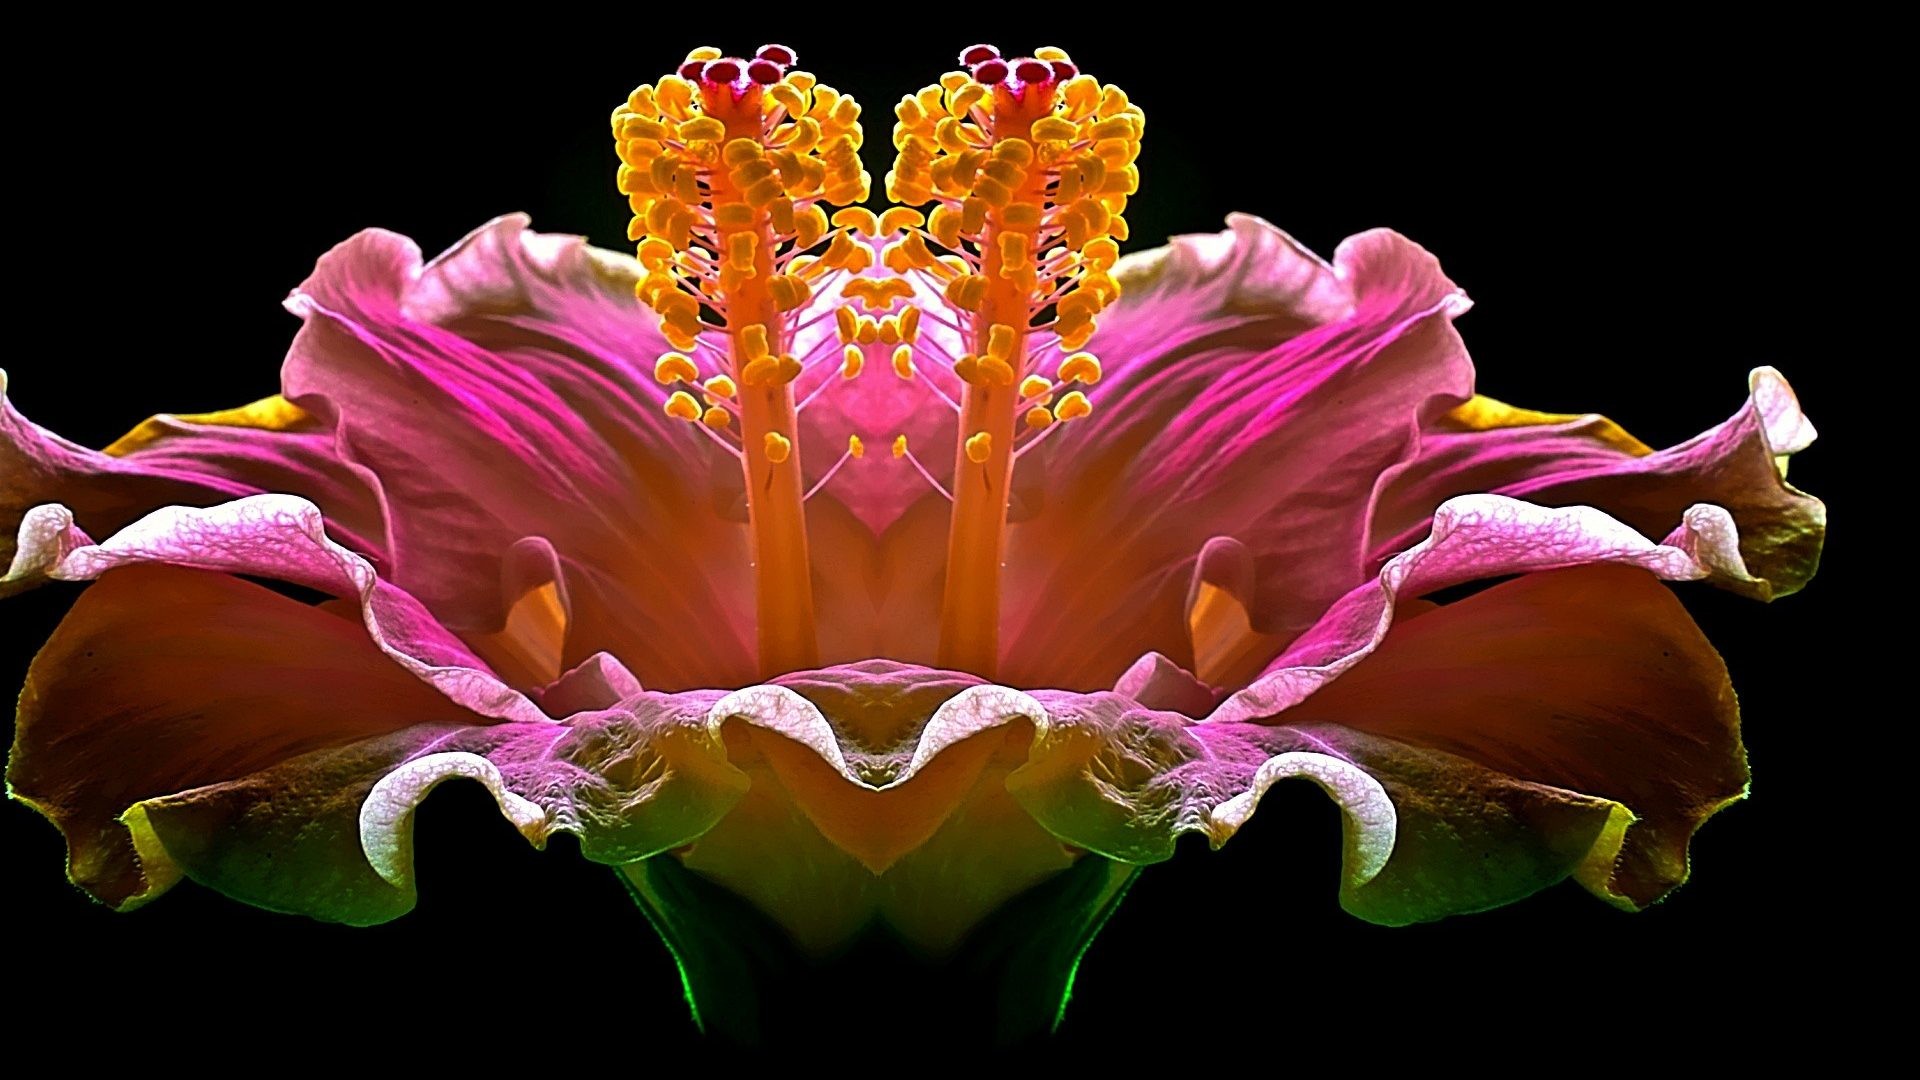 1920x1080 November 18, 2016 - Caring Colorful Heart Glow Hibiscus One Flowers Loving  Romantic Desktop Backgrounds